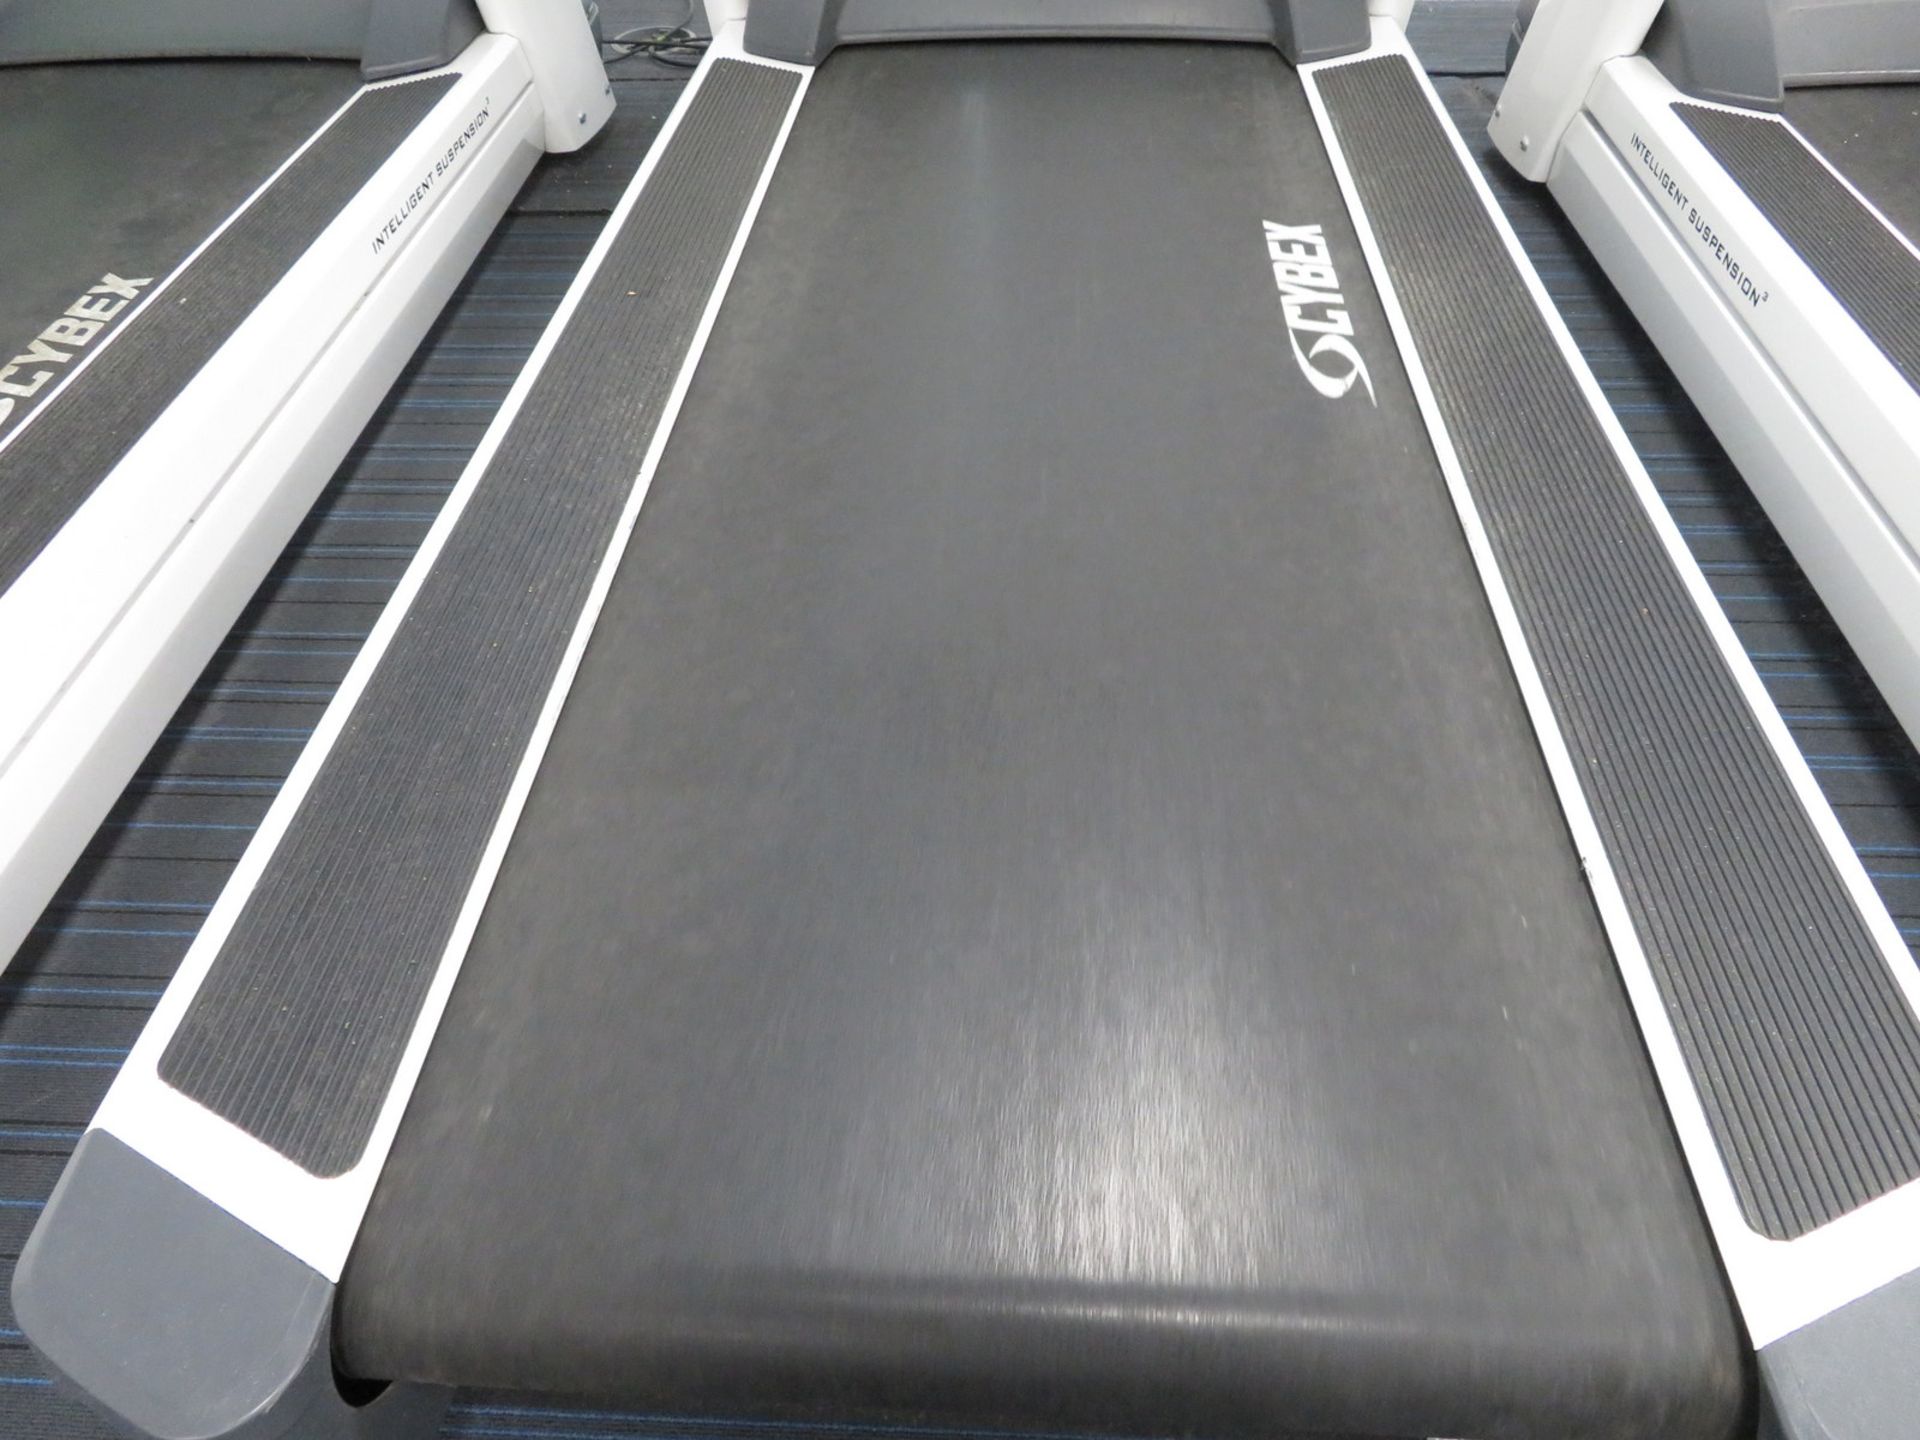 Cybex Treadmill Model: 770T, Working Condition With TV Display Monitor. - Image 3 of 10